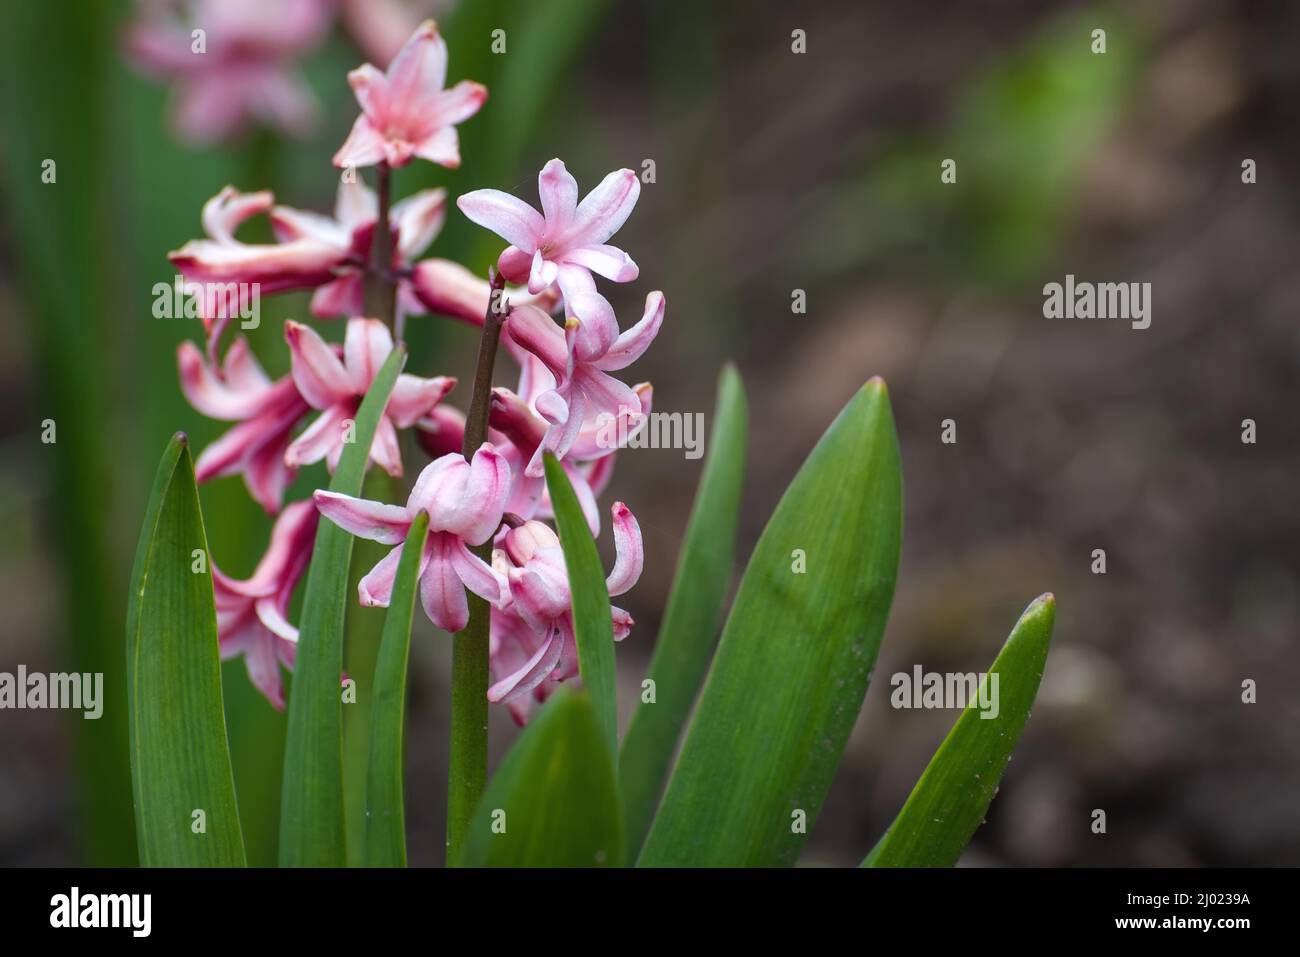 Beautiful pink hyacinth (Hyacinthus) flower with green leaves on a flowerbed in the garden in spring Stock Photo